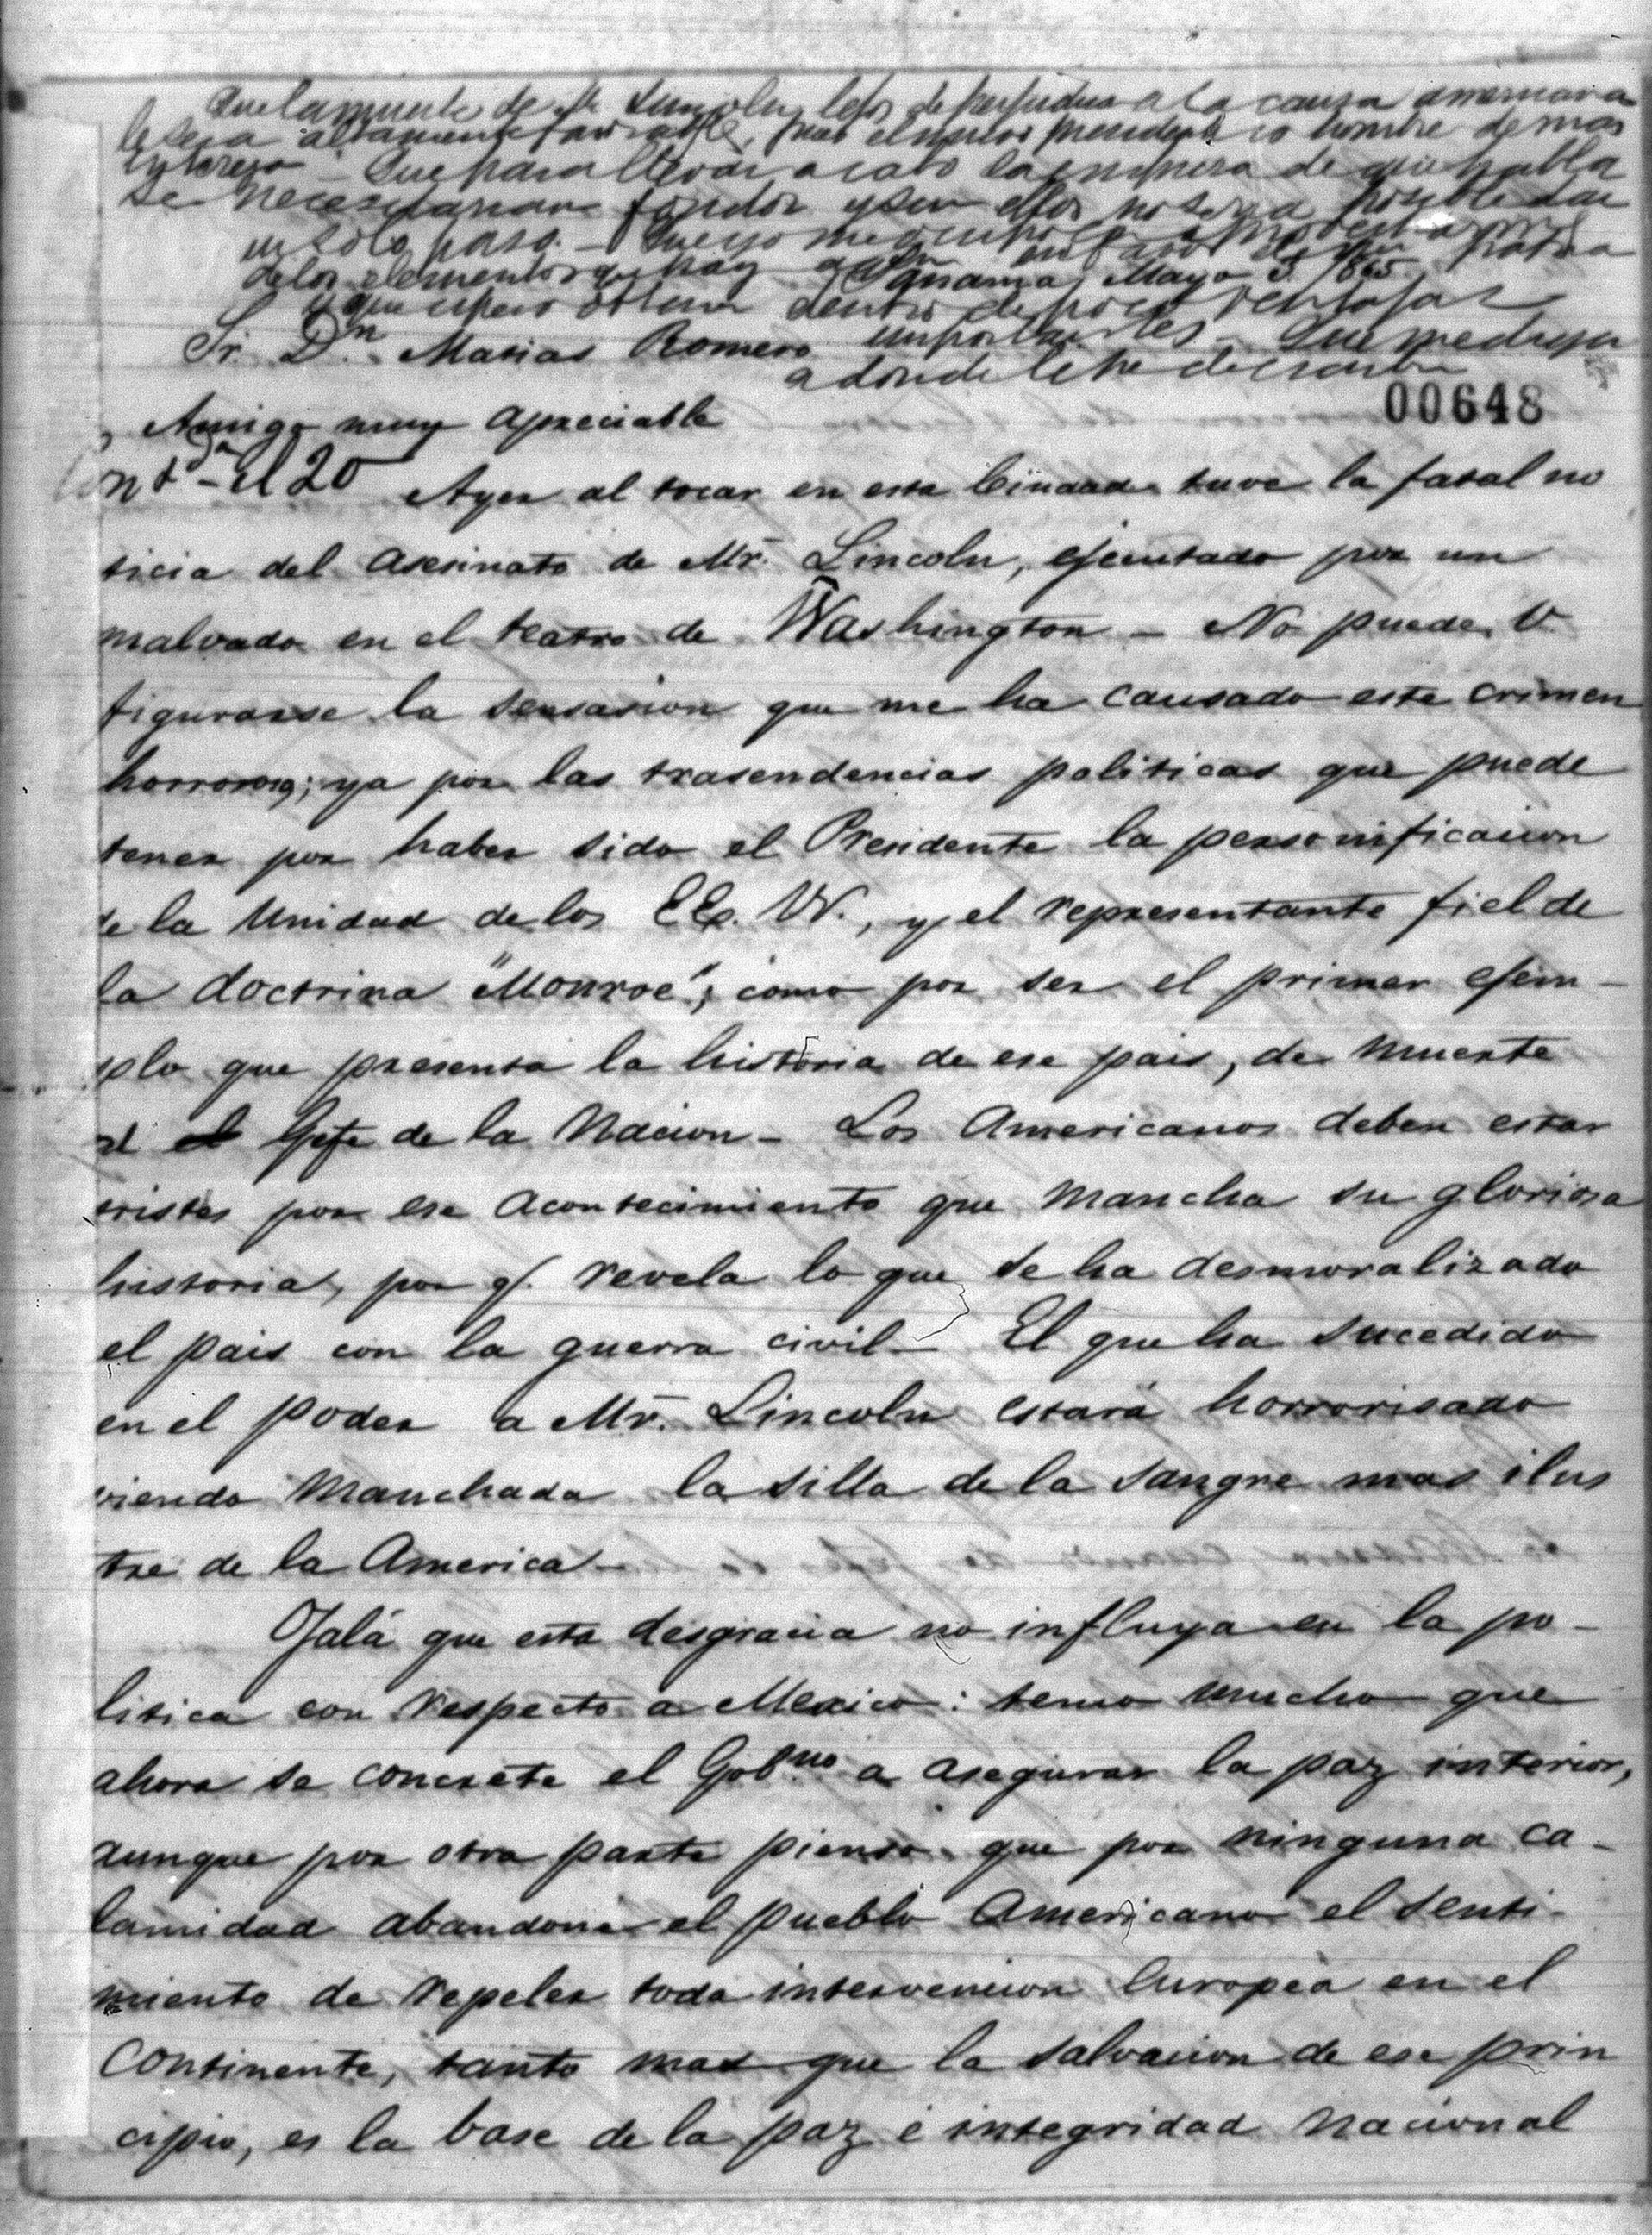 Letter to Mexican diplomat Matias Romero from G. Barrios